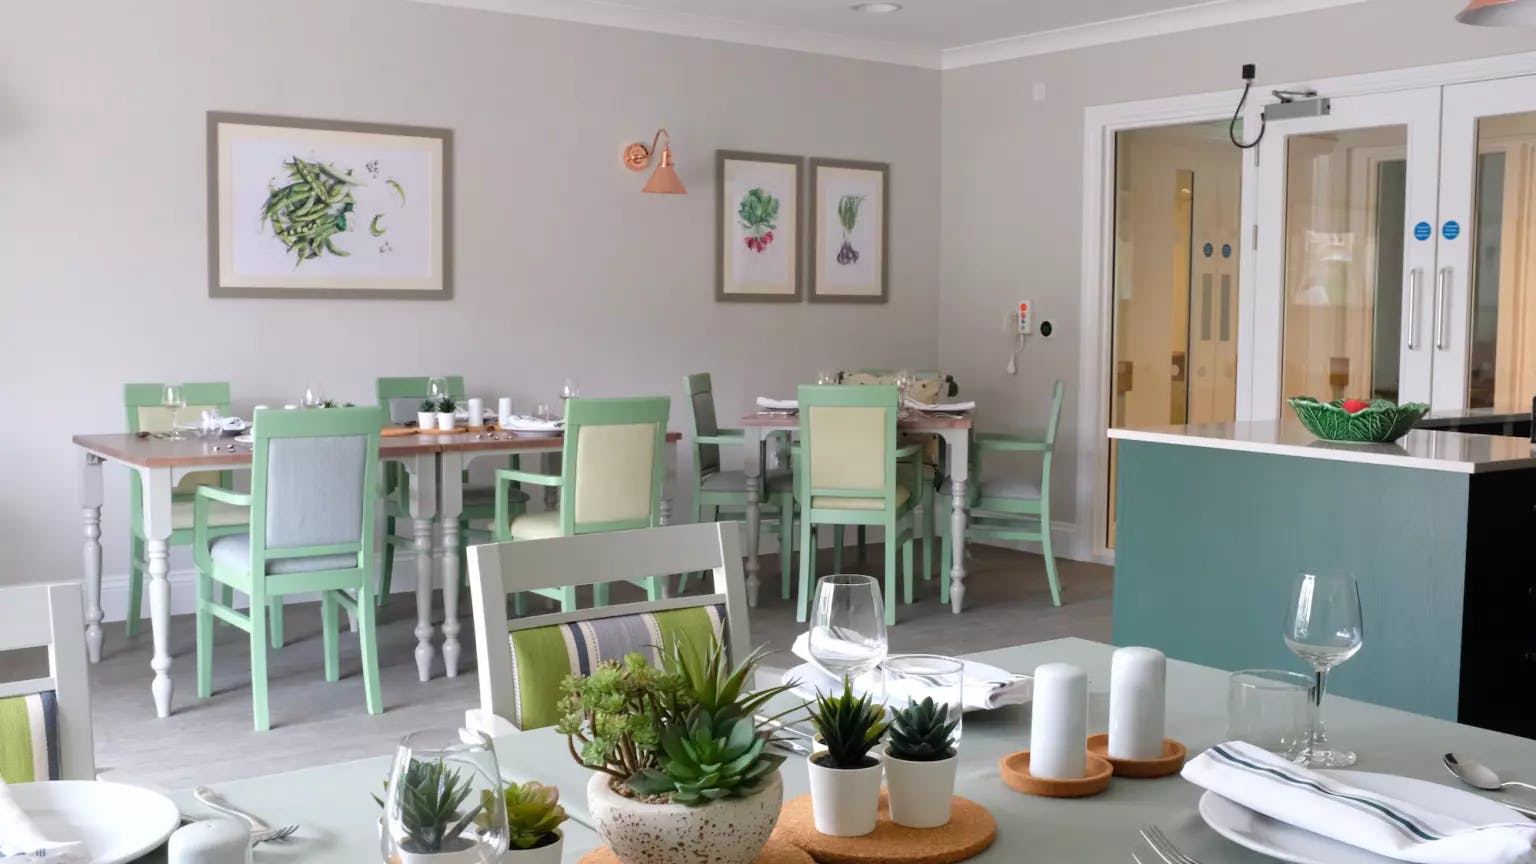 Dining room of Mantels Court care home in Biggleswade, Bedfordshire